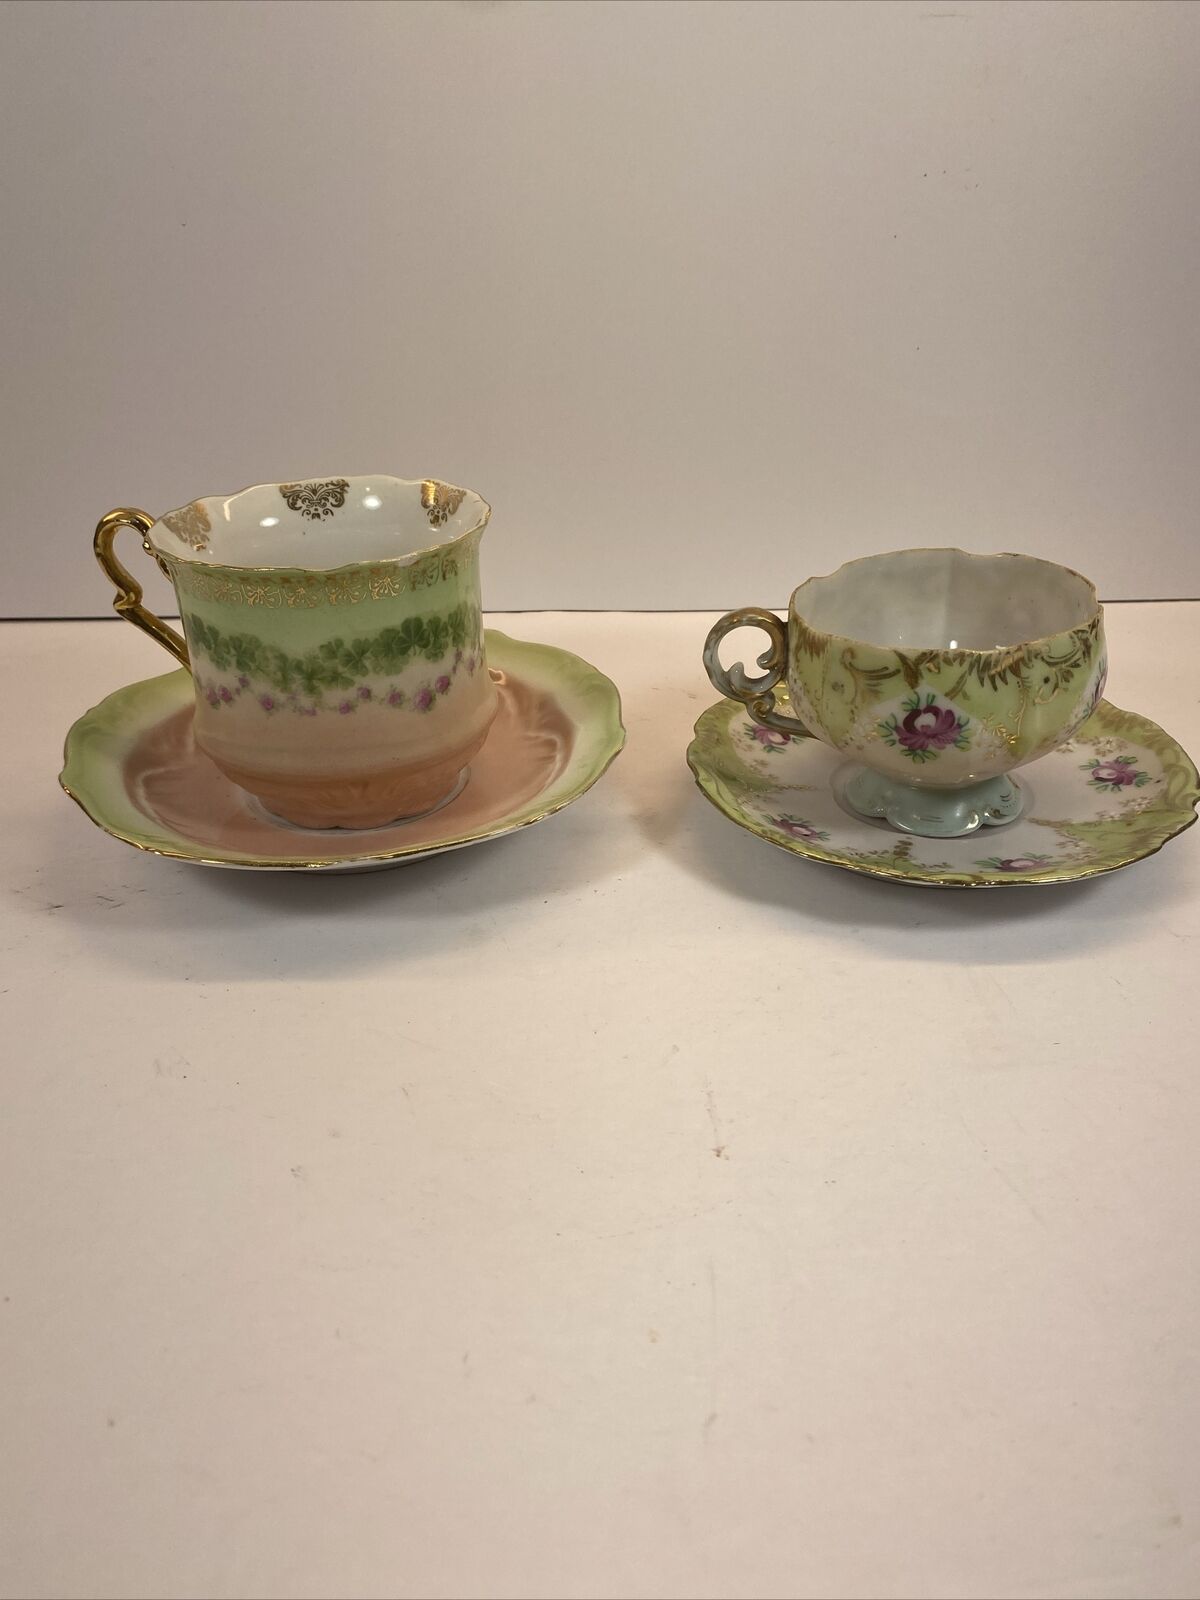 Set of 2 Cups/Saucers Unbranded Shamrock Roses Pastels Green Gold Accent c 1900s